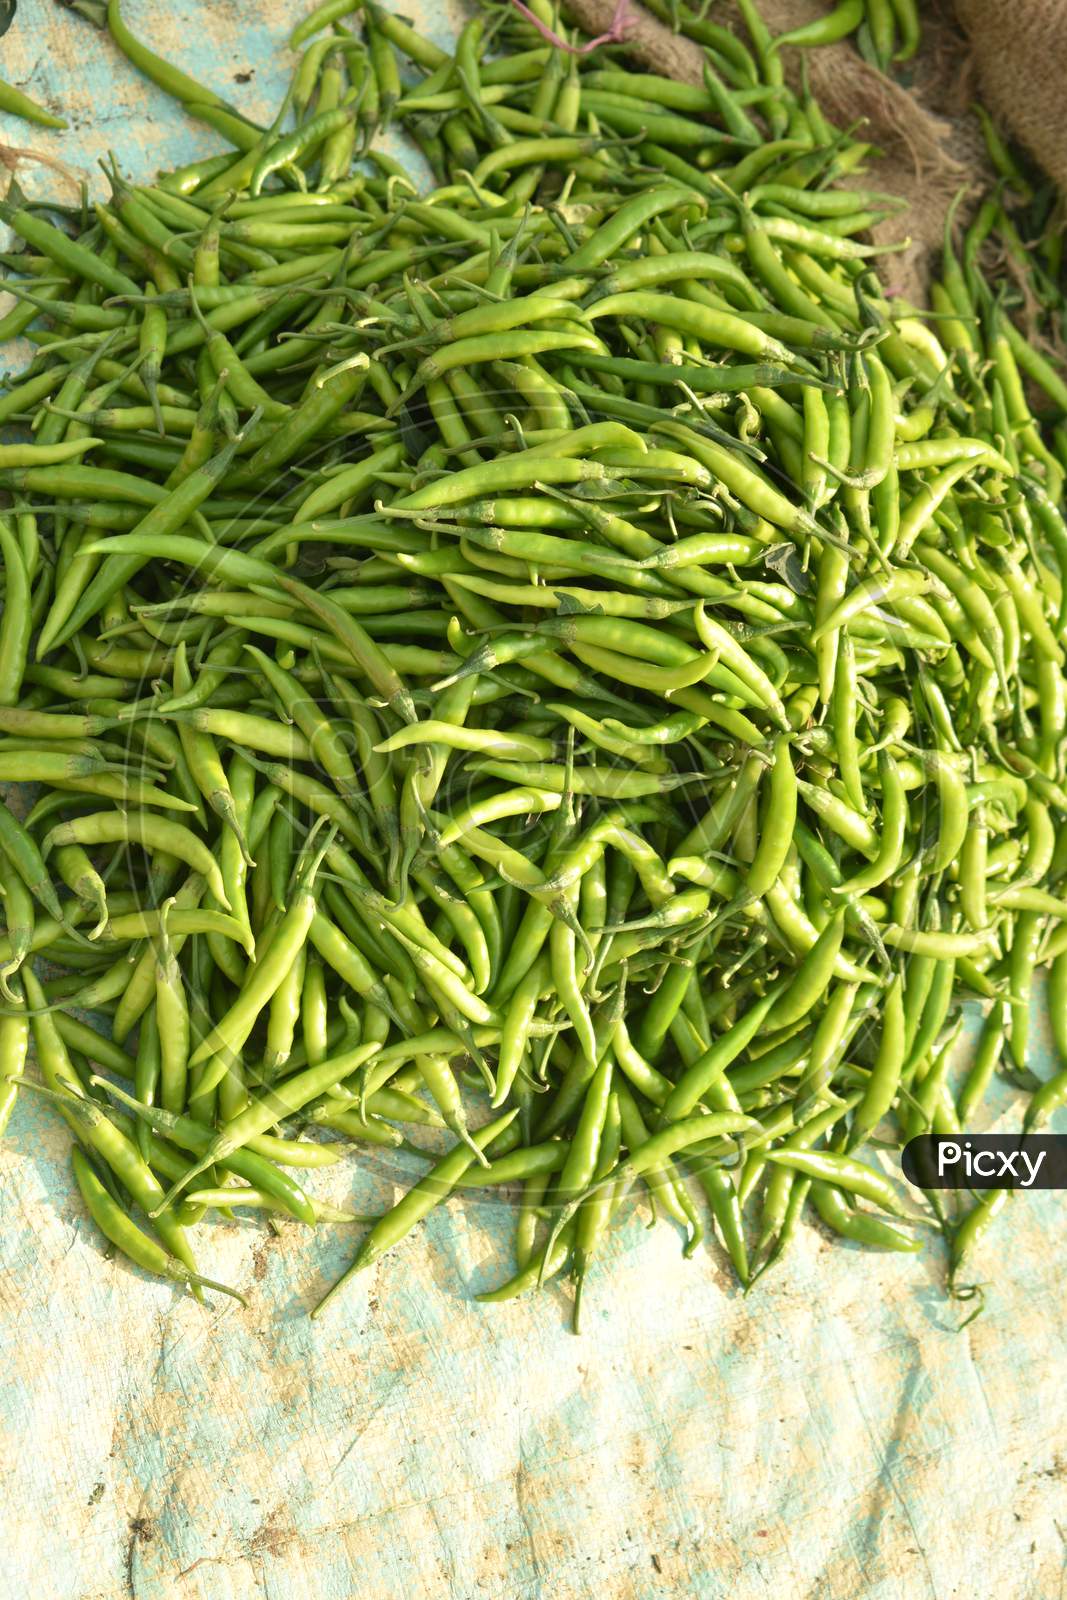 Vegetables For Sale At India.